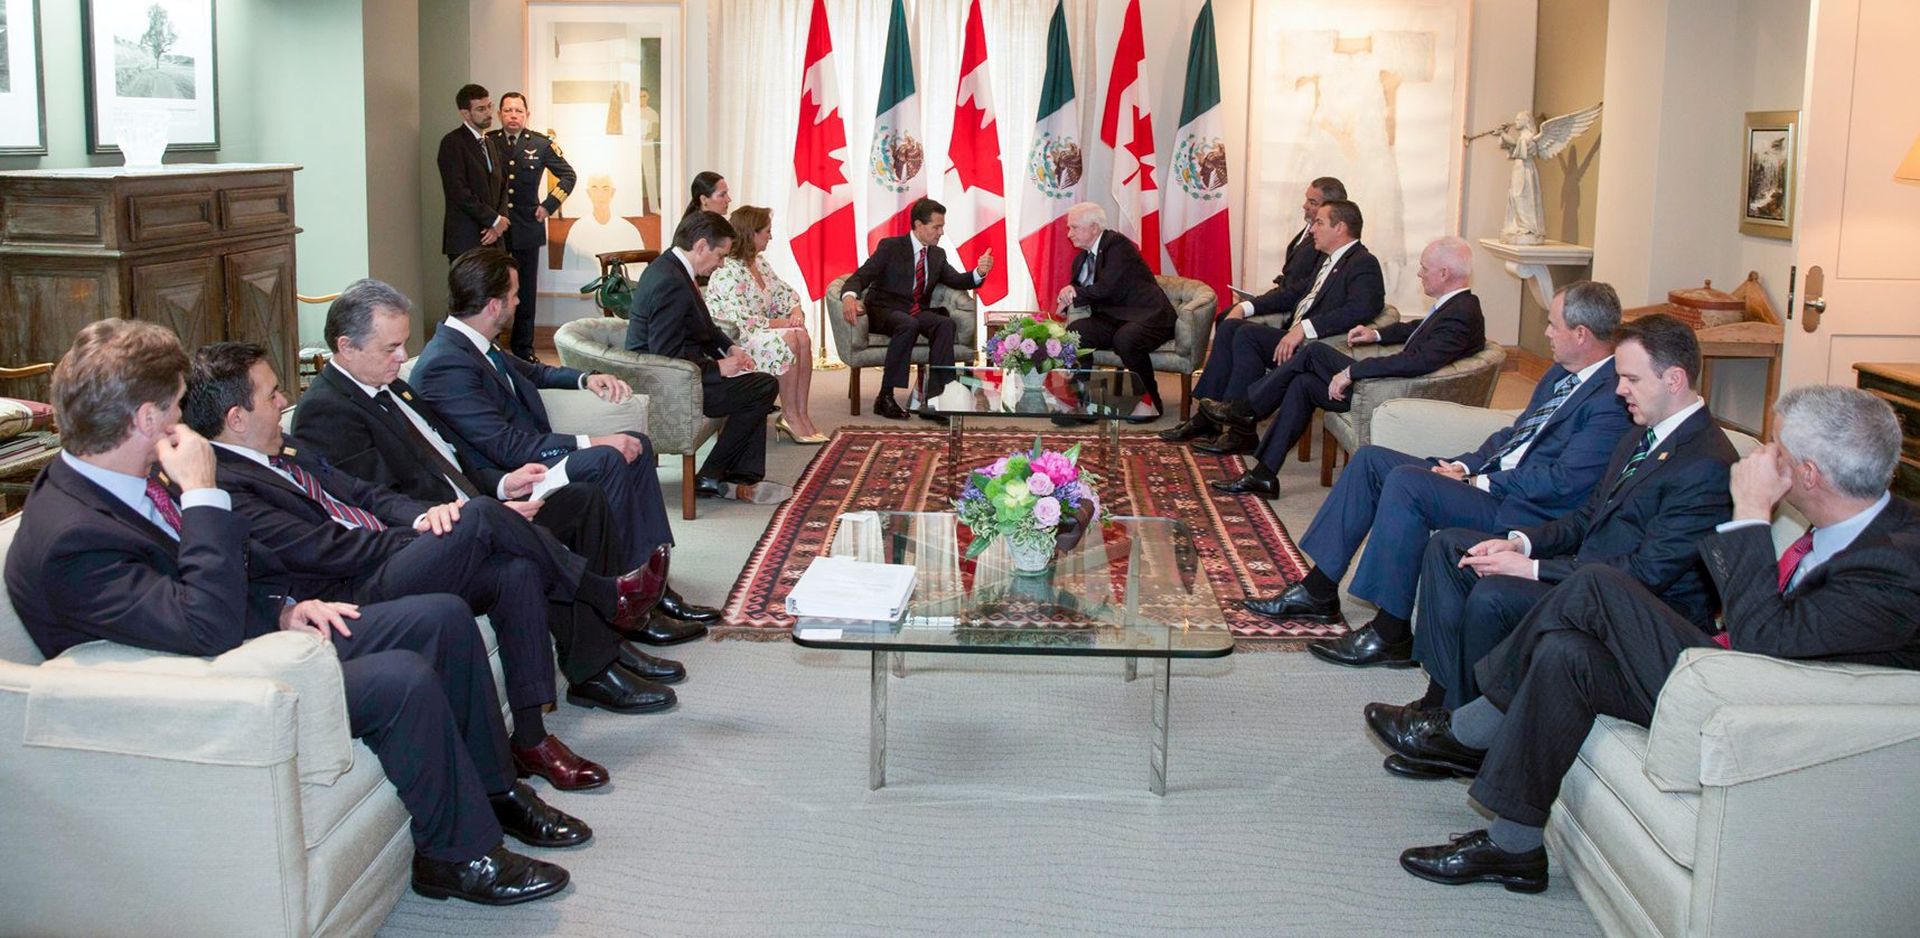 epa05395533 A handout picture made available by the Mexican Presidency shows Mexico's President Enrique Pena Nieto (C-L) talking to Governor General of Canada David Johnston (C-R) during a meeting in Quebec, Canada, 27 June 2016. Pena Nieto is on his first official visit to Canada aimed to improve commerce and bilateral relationships between the countries.  EPA/MEXICO PRESIDENCY  HANDOUT EDITORIAL USE ONLY/NO SALES